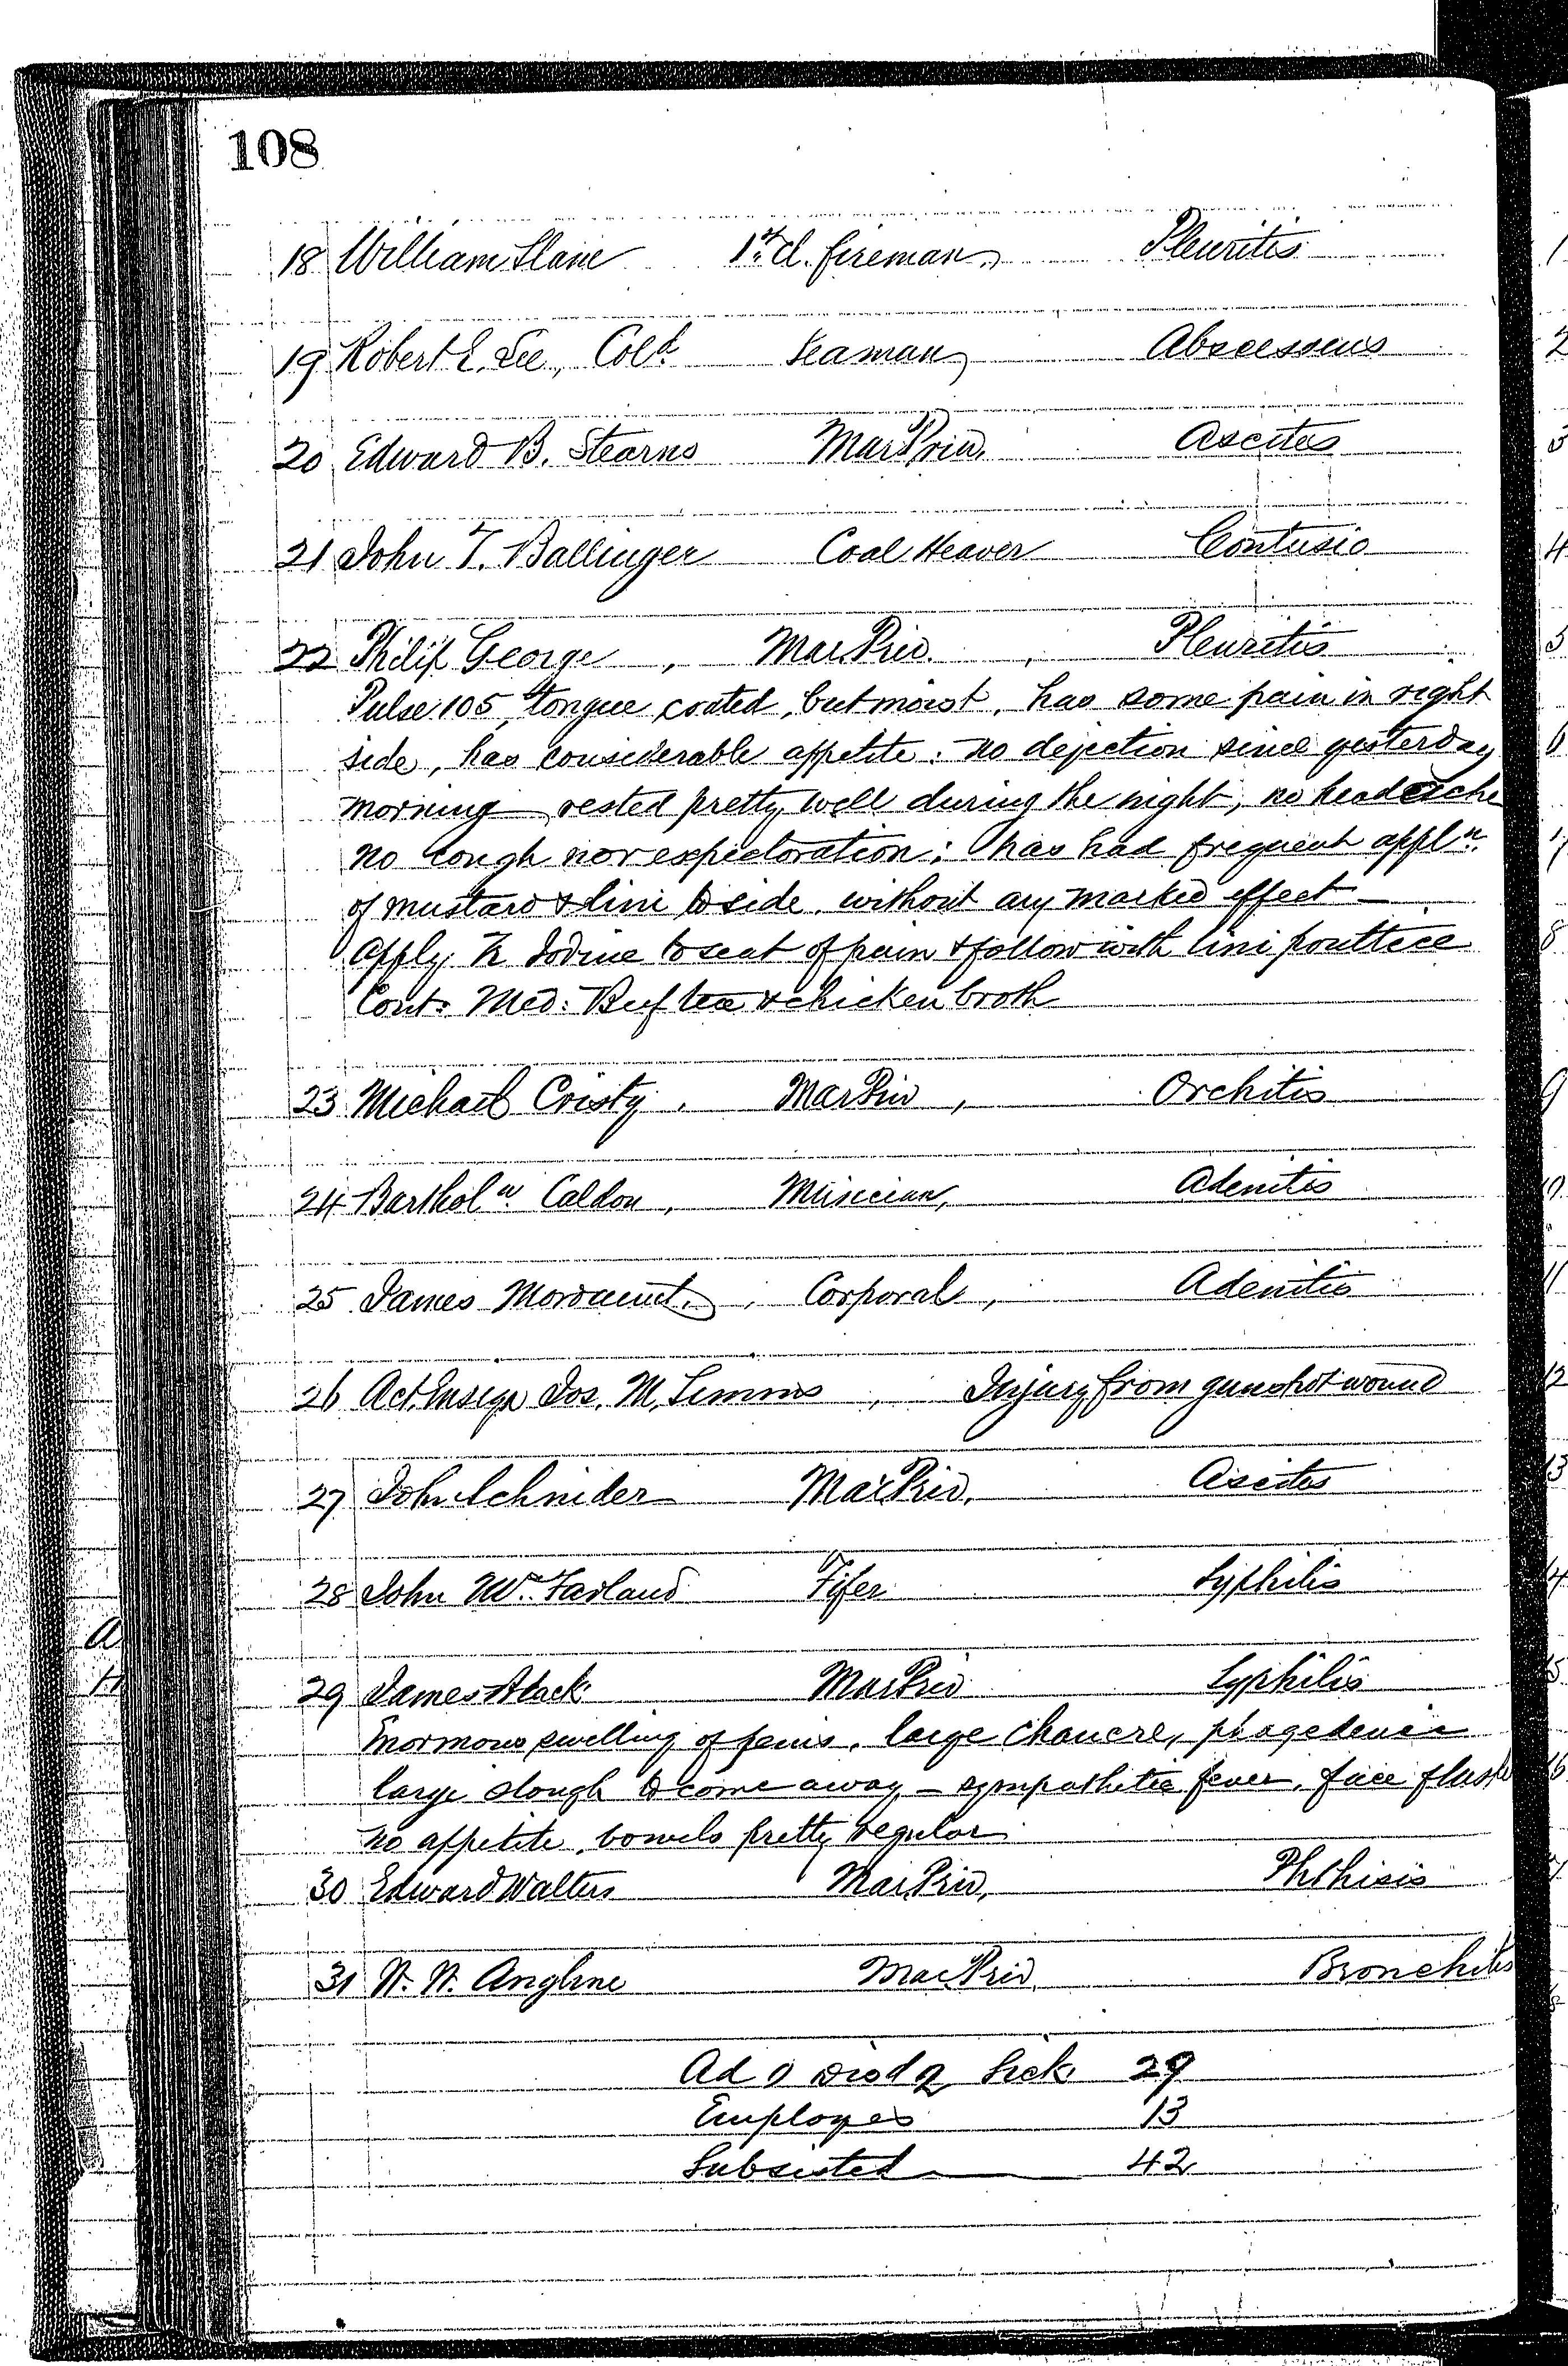 Log of patients admitted and treated at the Naval Hospital, Washington City, on December 1, 1866 - Page 2 of 2